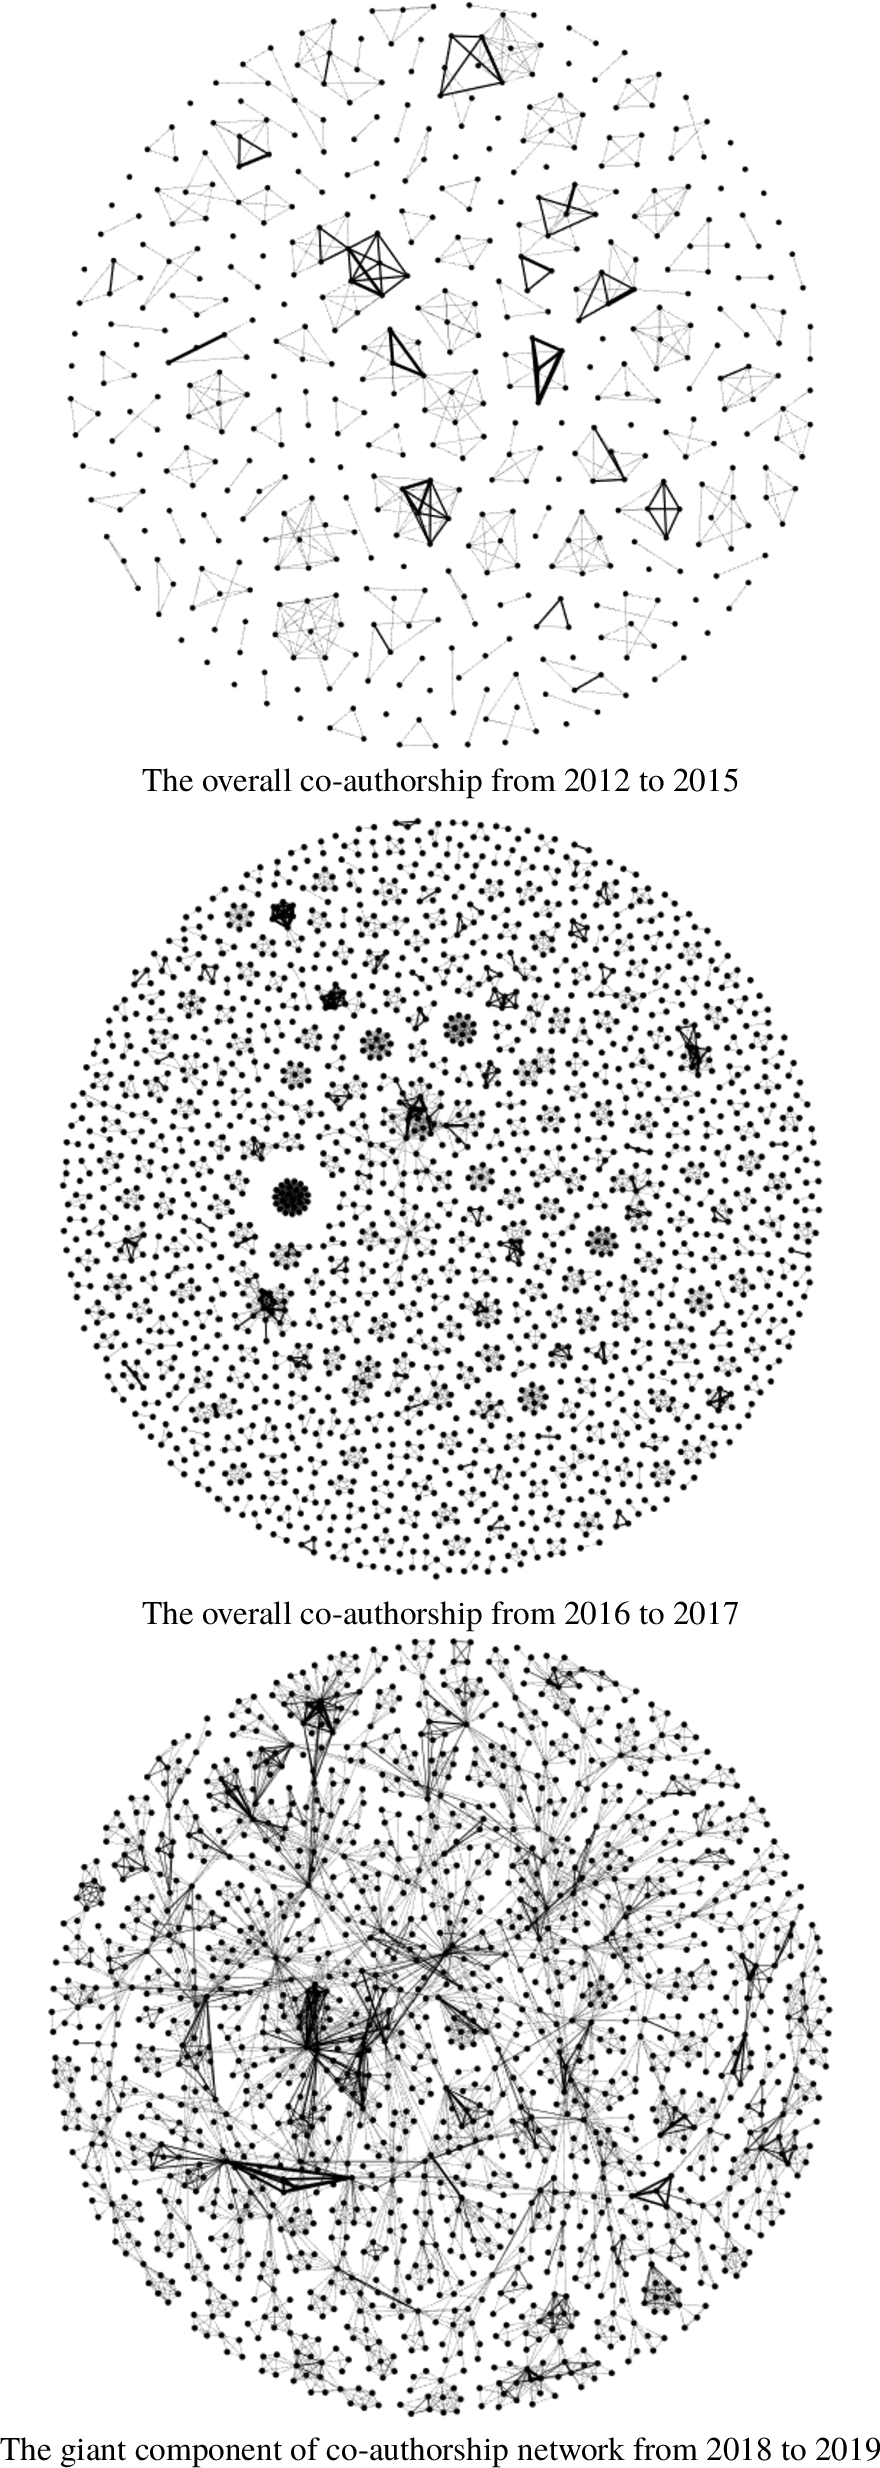 The evolution of overall co-authorship network.